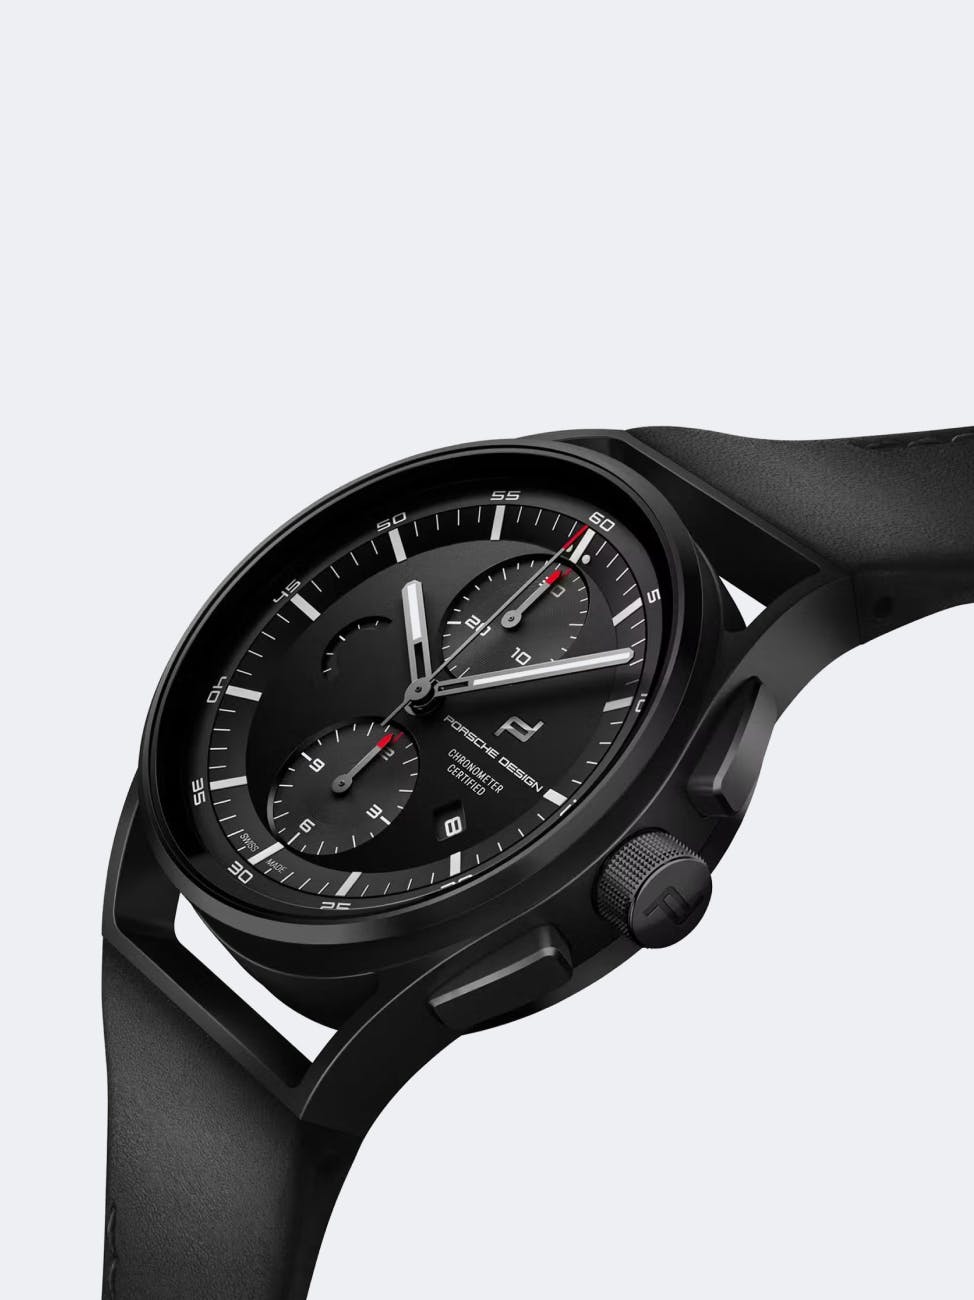 You can see a black wristwatch from Porsche.
